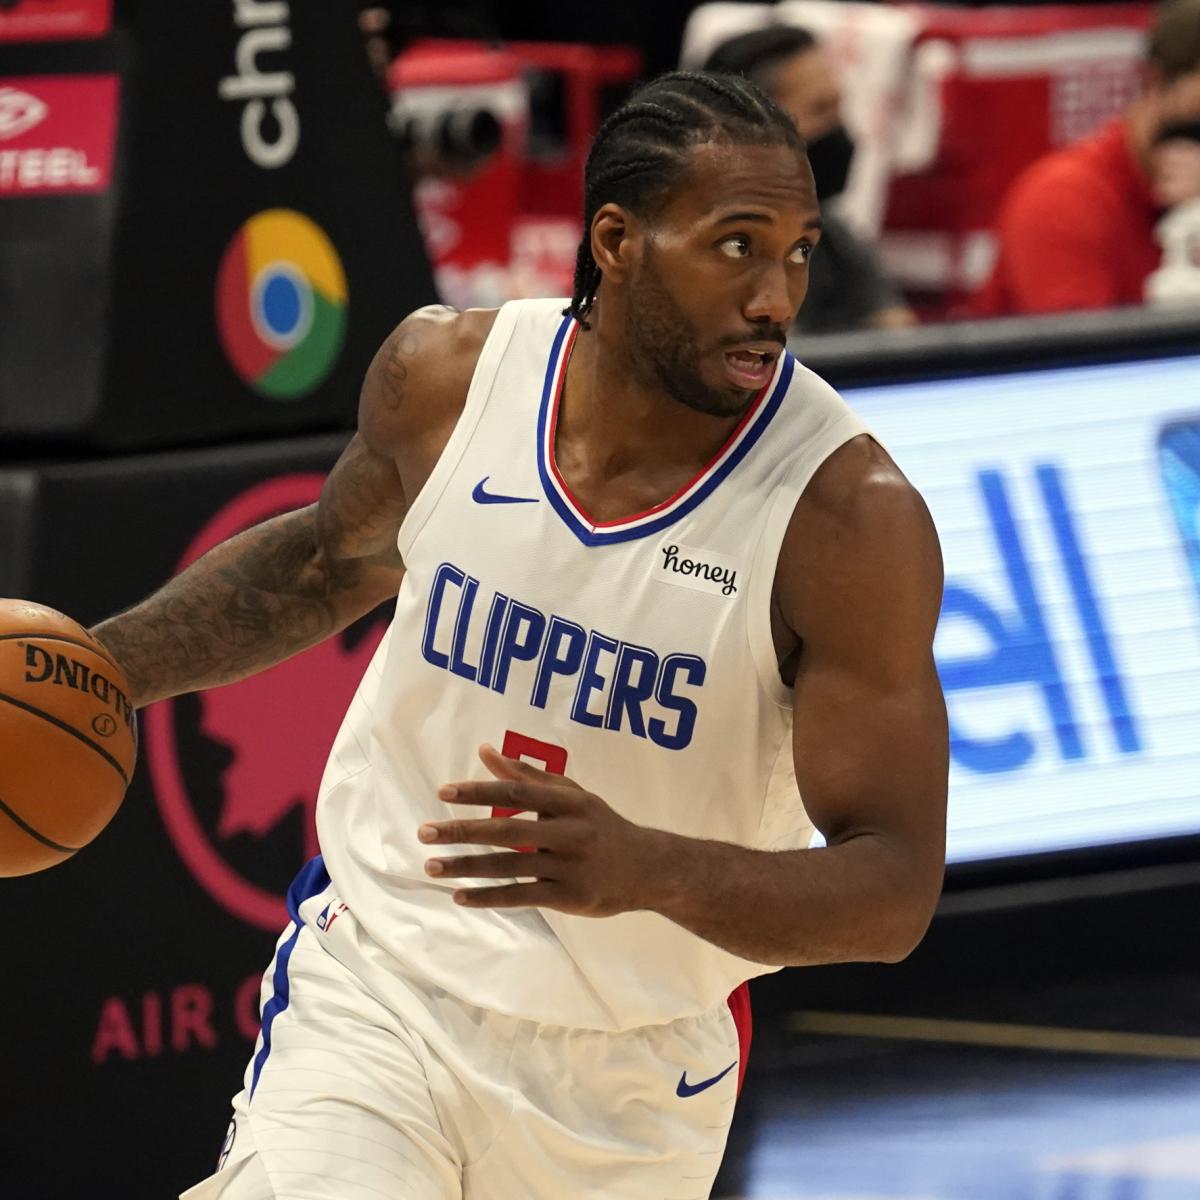 Clippers' Kawhi Leonard Reportedly Won't Return from Knee Injury in Suns Series